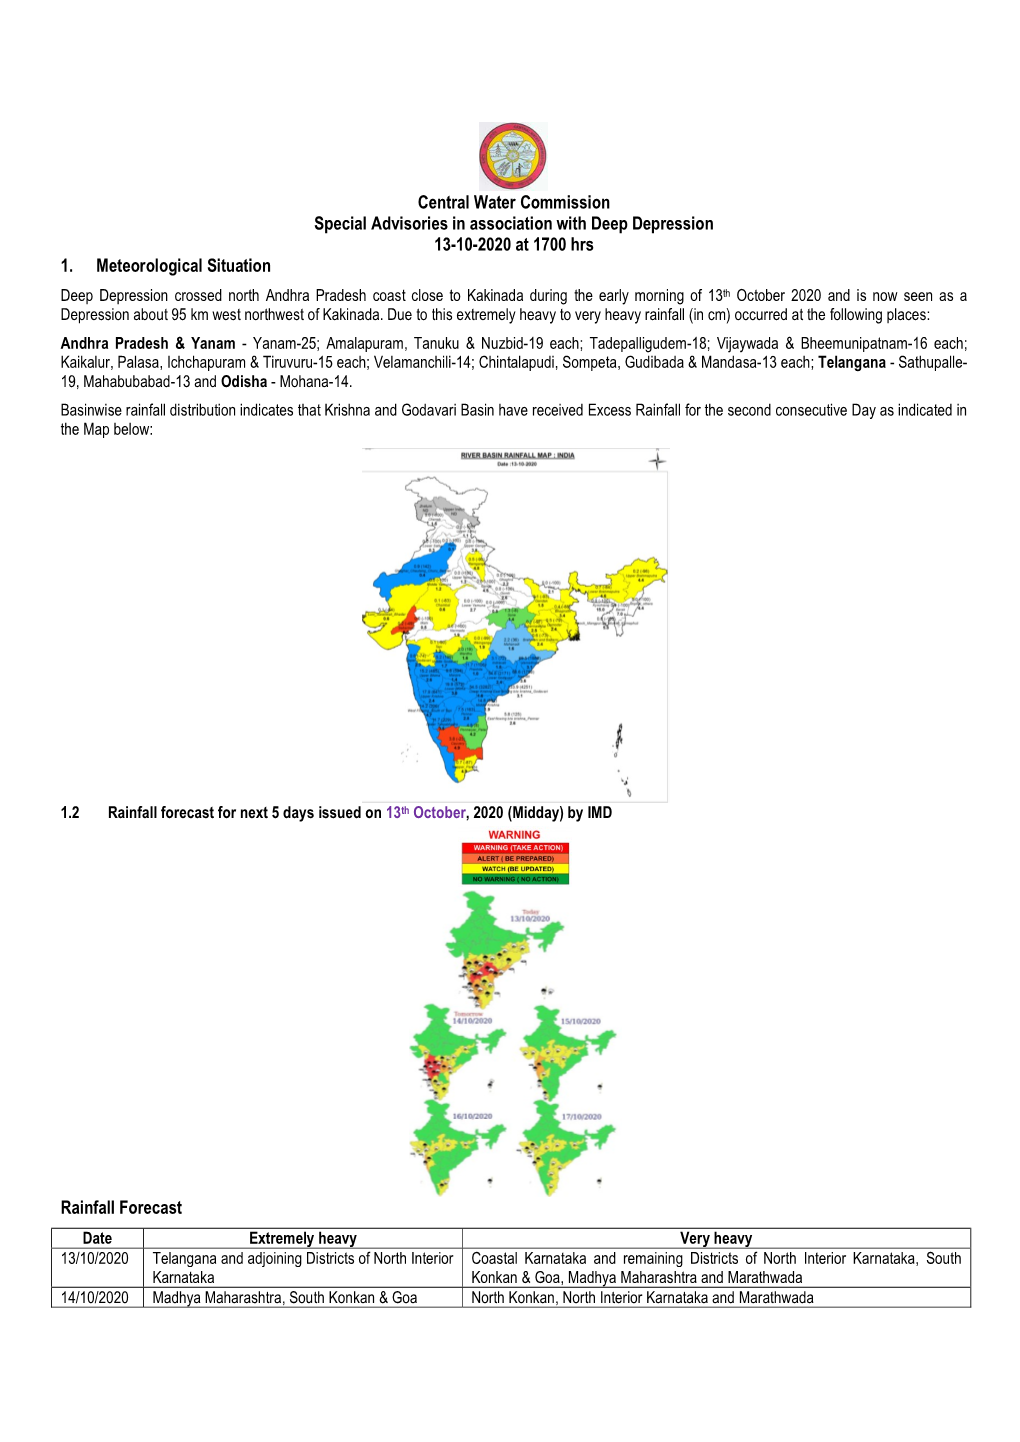 Central Water Commission Special Advisories in Association with Deep Depression 13-10-2020 at 1700 Hrs 1. Meteorological Situation